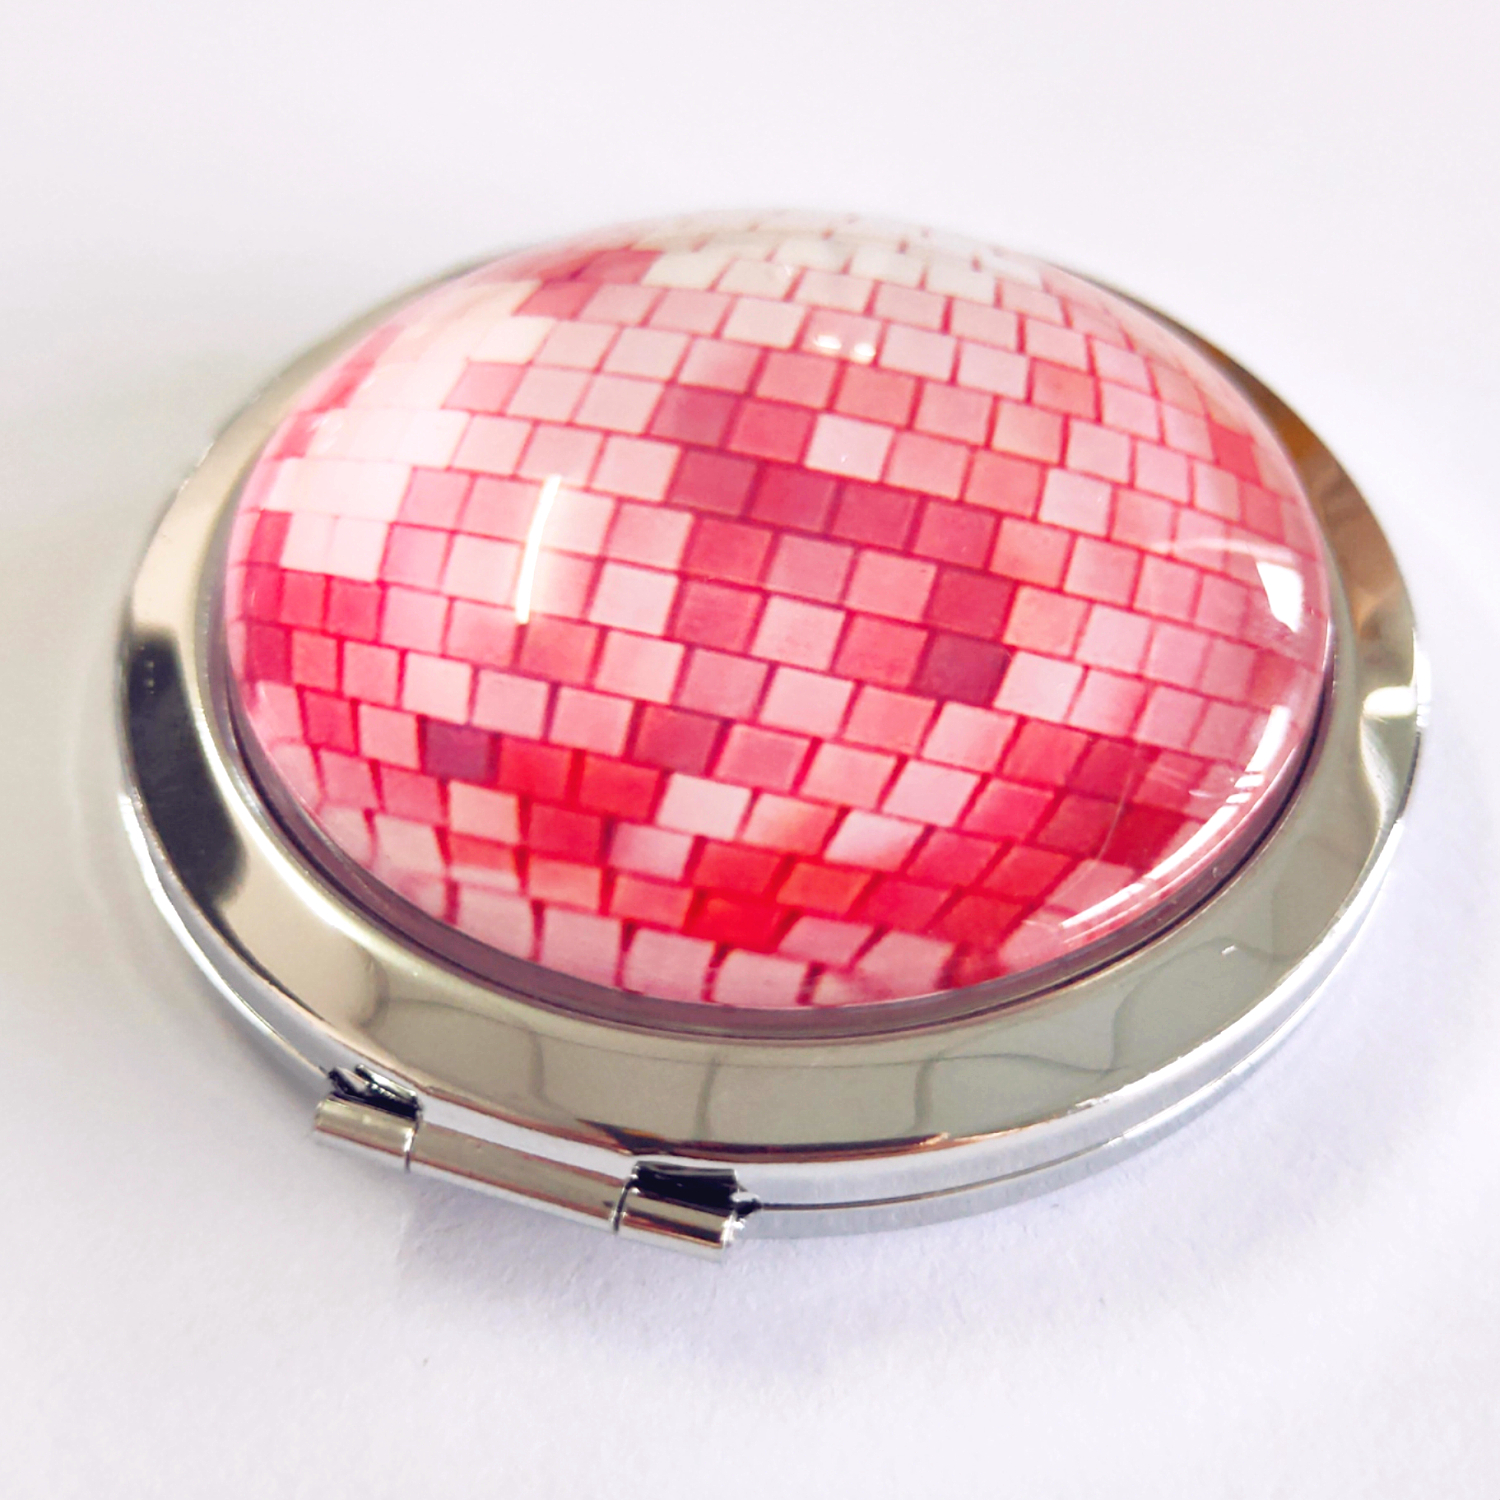 Custom designs compact mirror with clear high radian printed glass on makeup mirror top cover